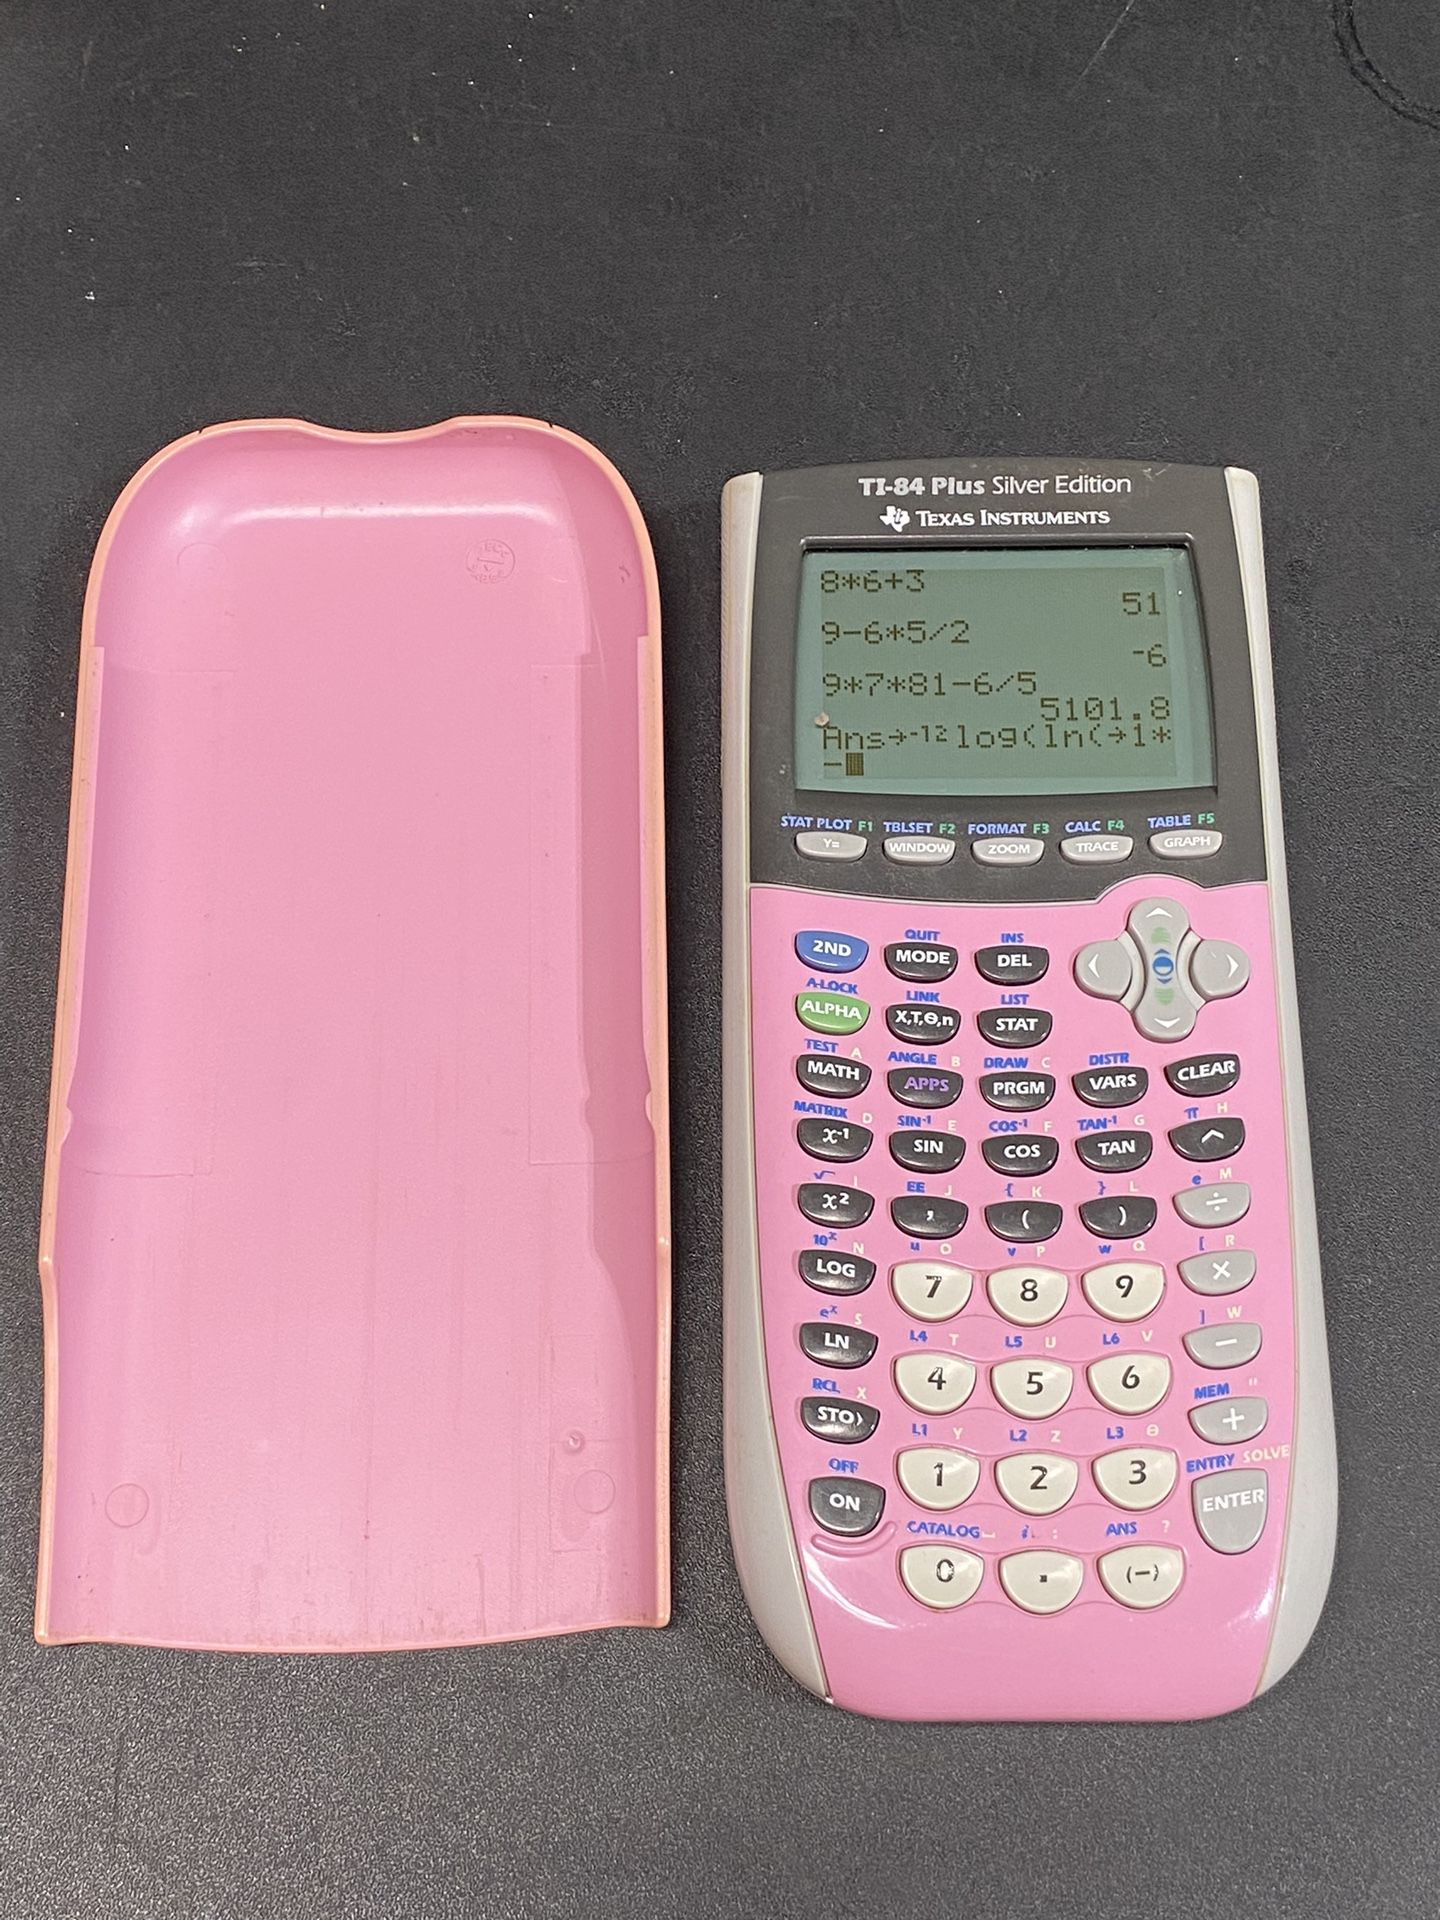 Texas Instruments TI-84 Plus Silver Edition Graphing Calculator light Pink Tested, Requires 4 AAA Batteries not included.